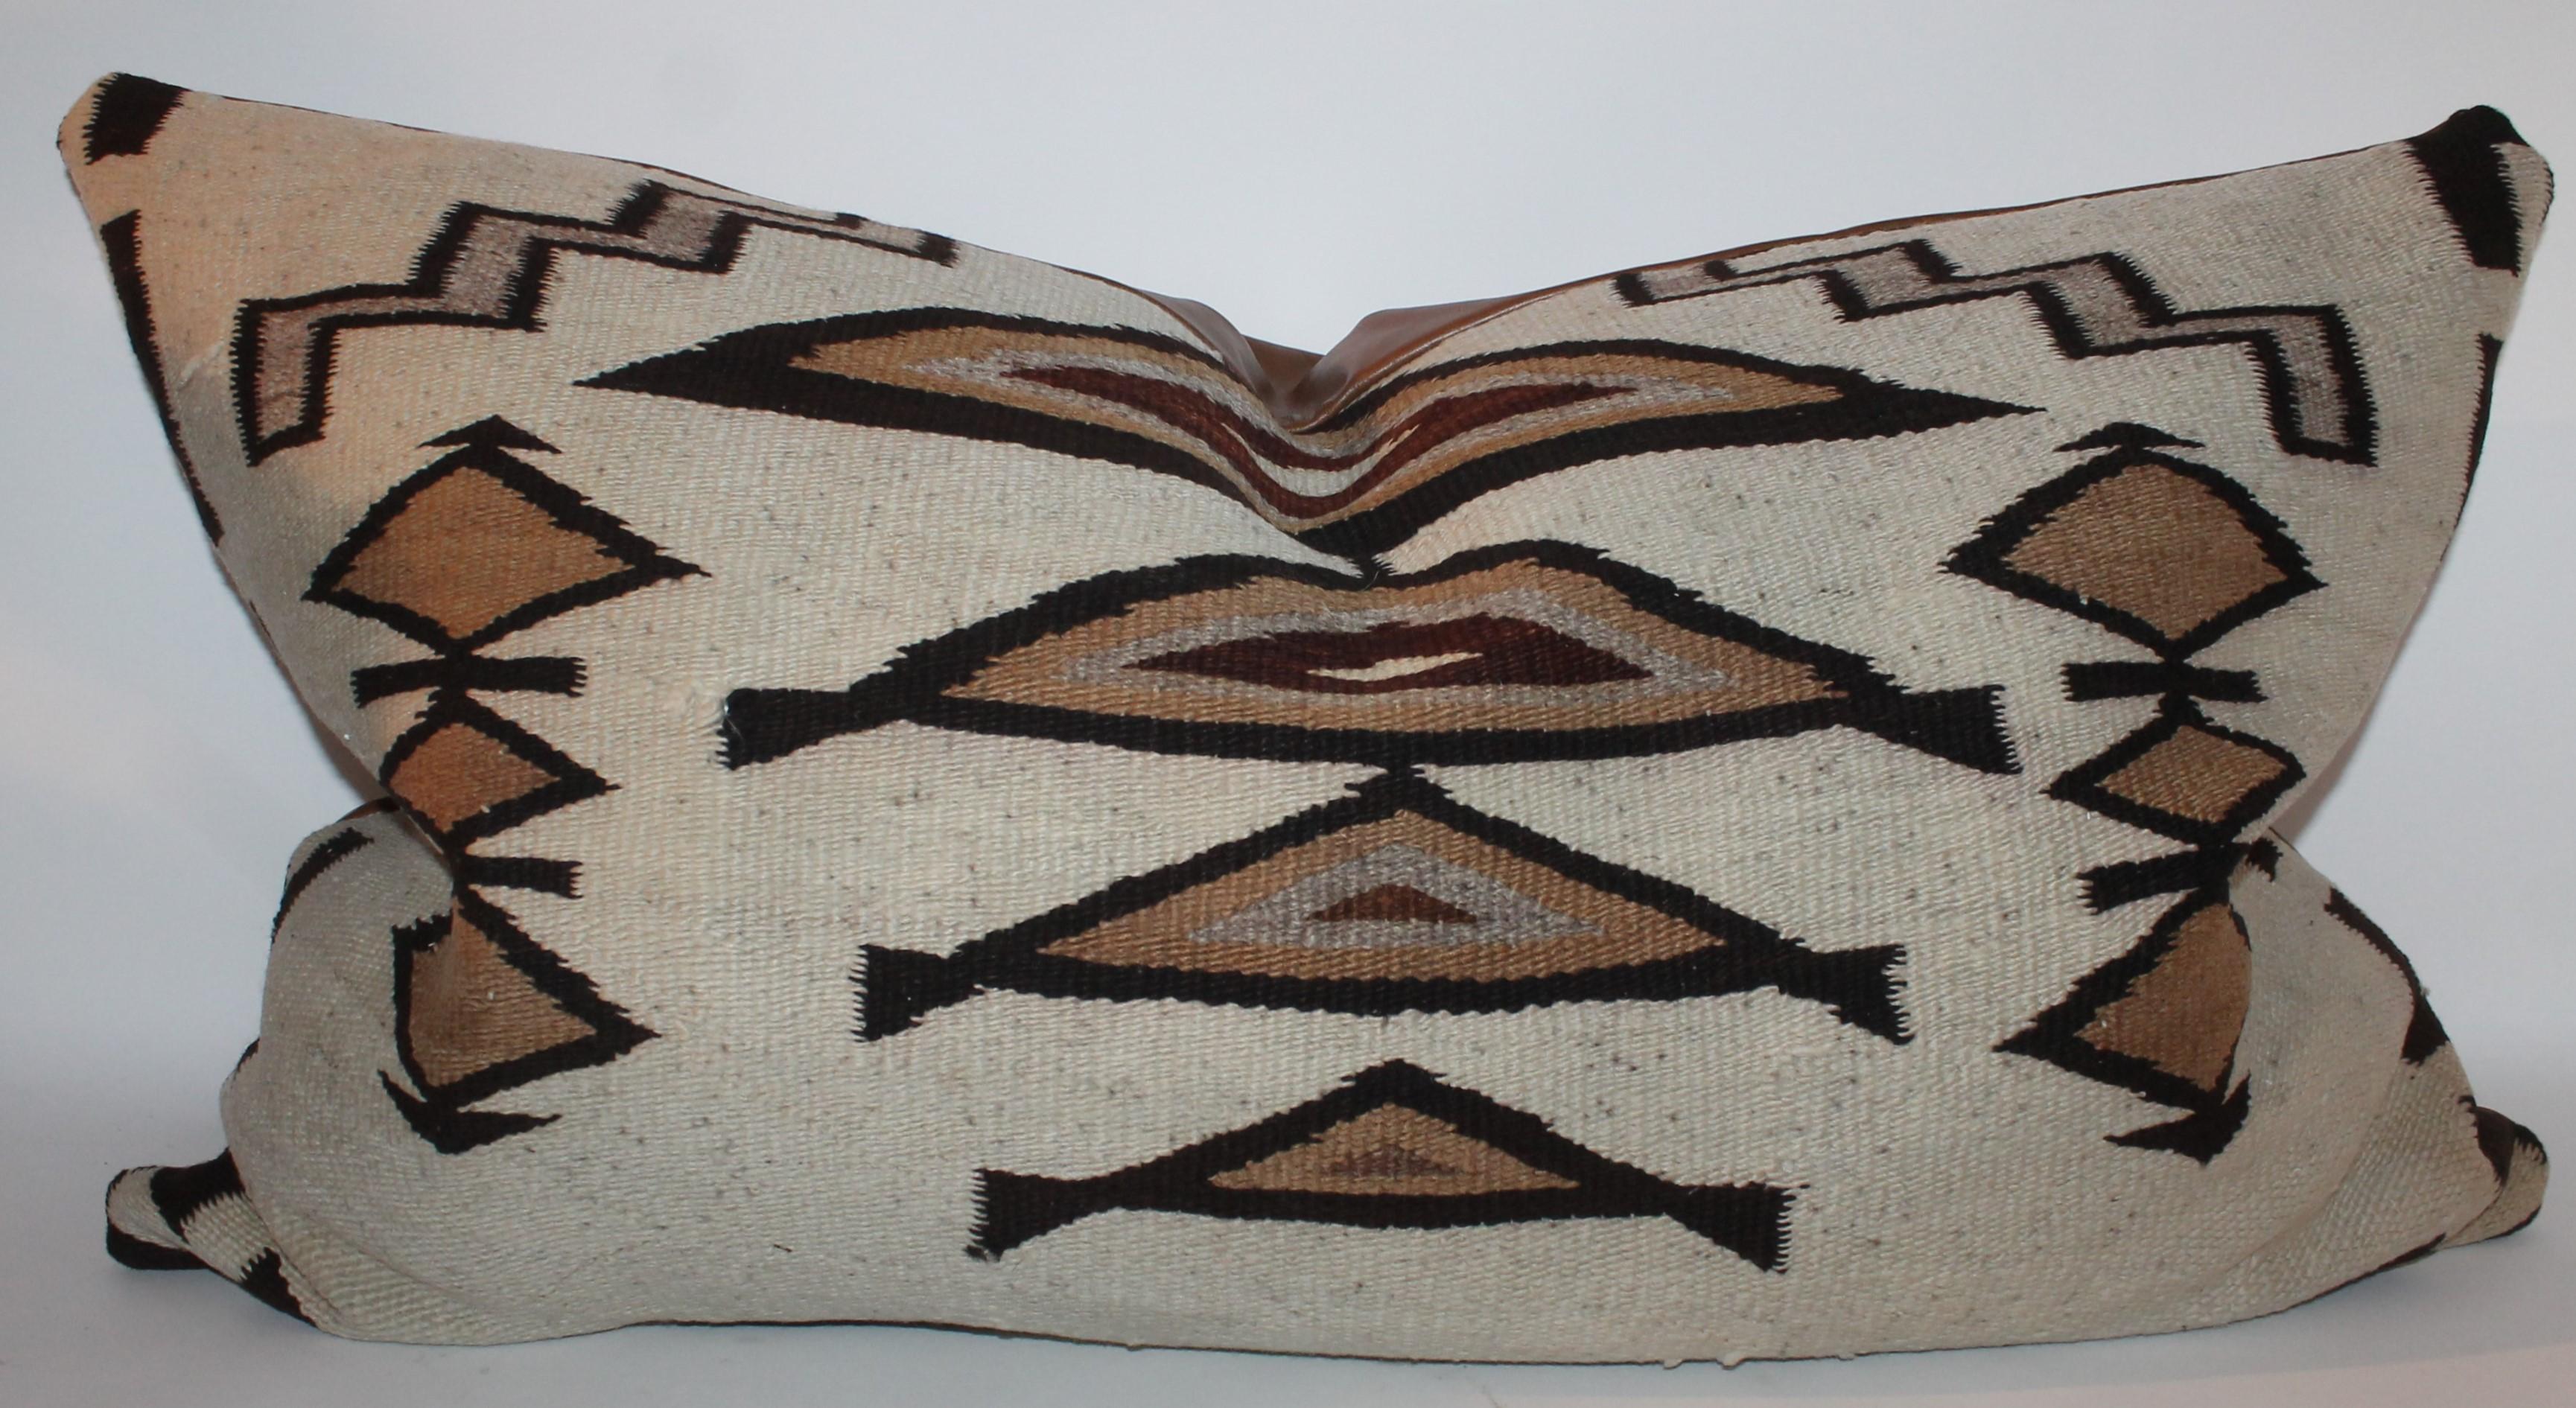 Large Navajo Indian Weaving Bolster Pillows with Leather Backing 2